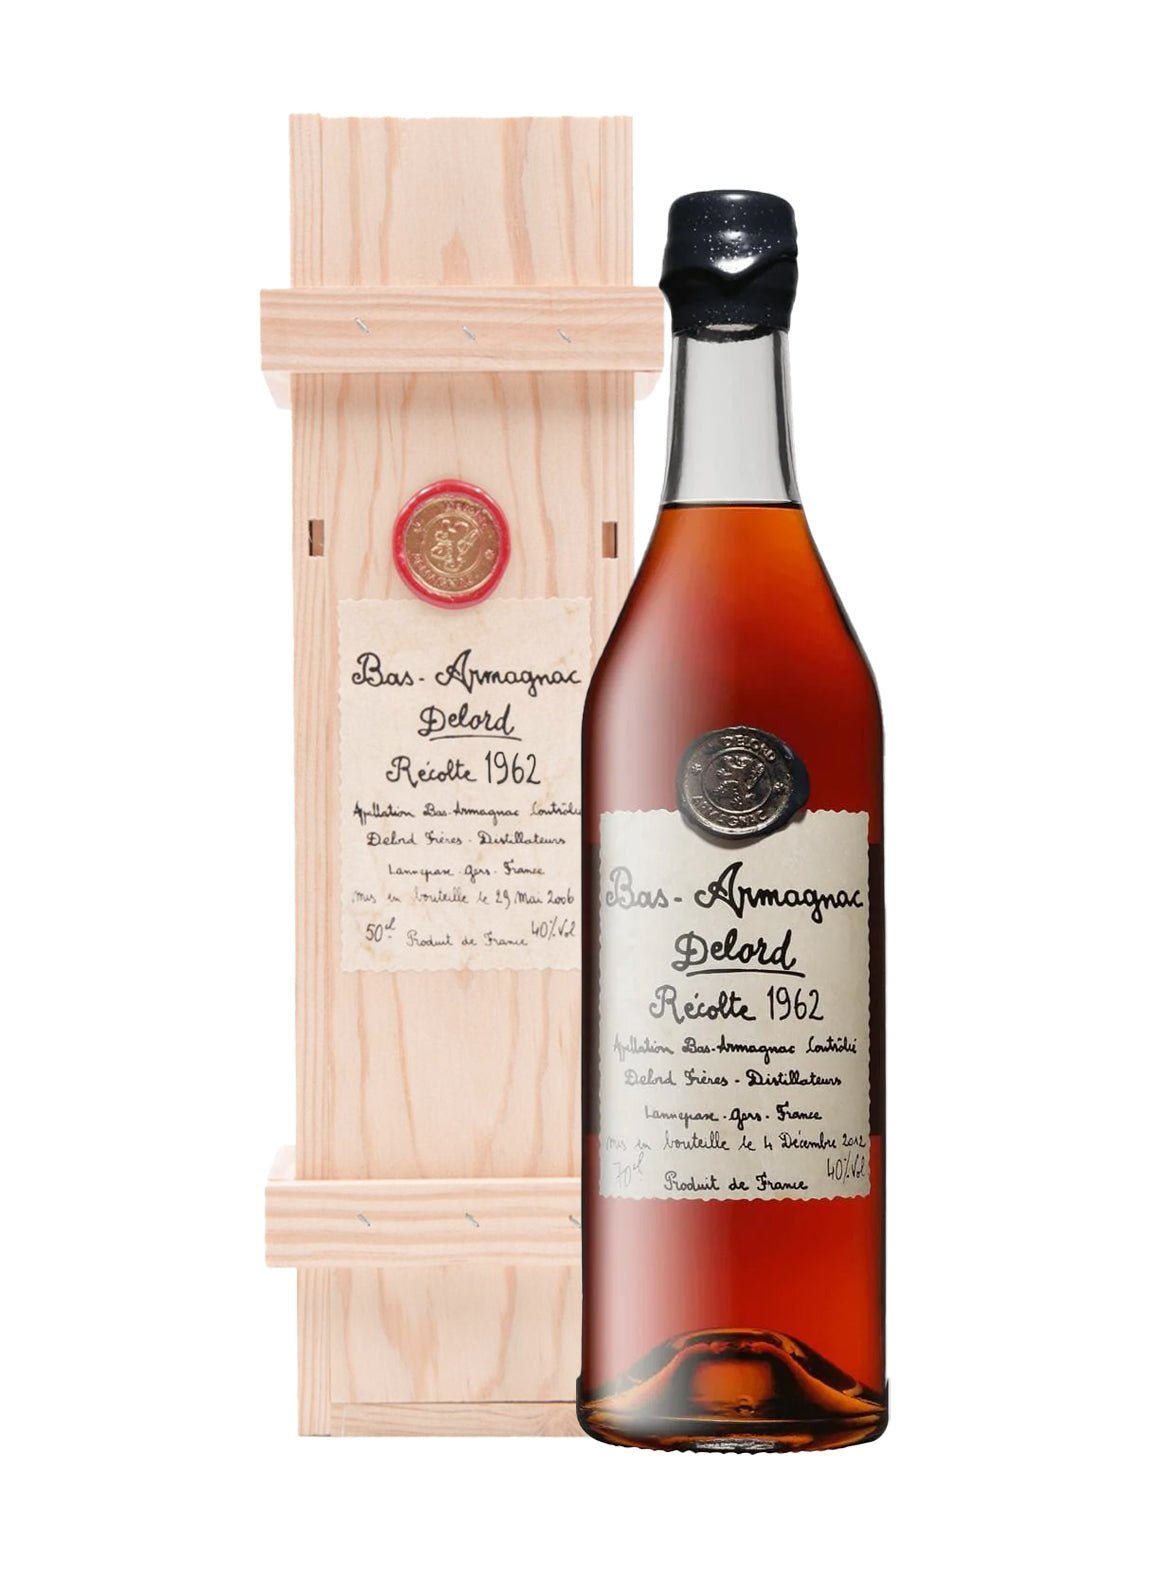 Delord 1962 Armagnac 40% 700ml | Brandy | Shop online at Spirits of France